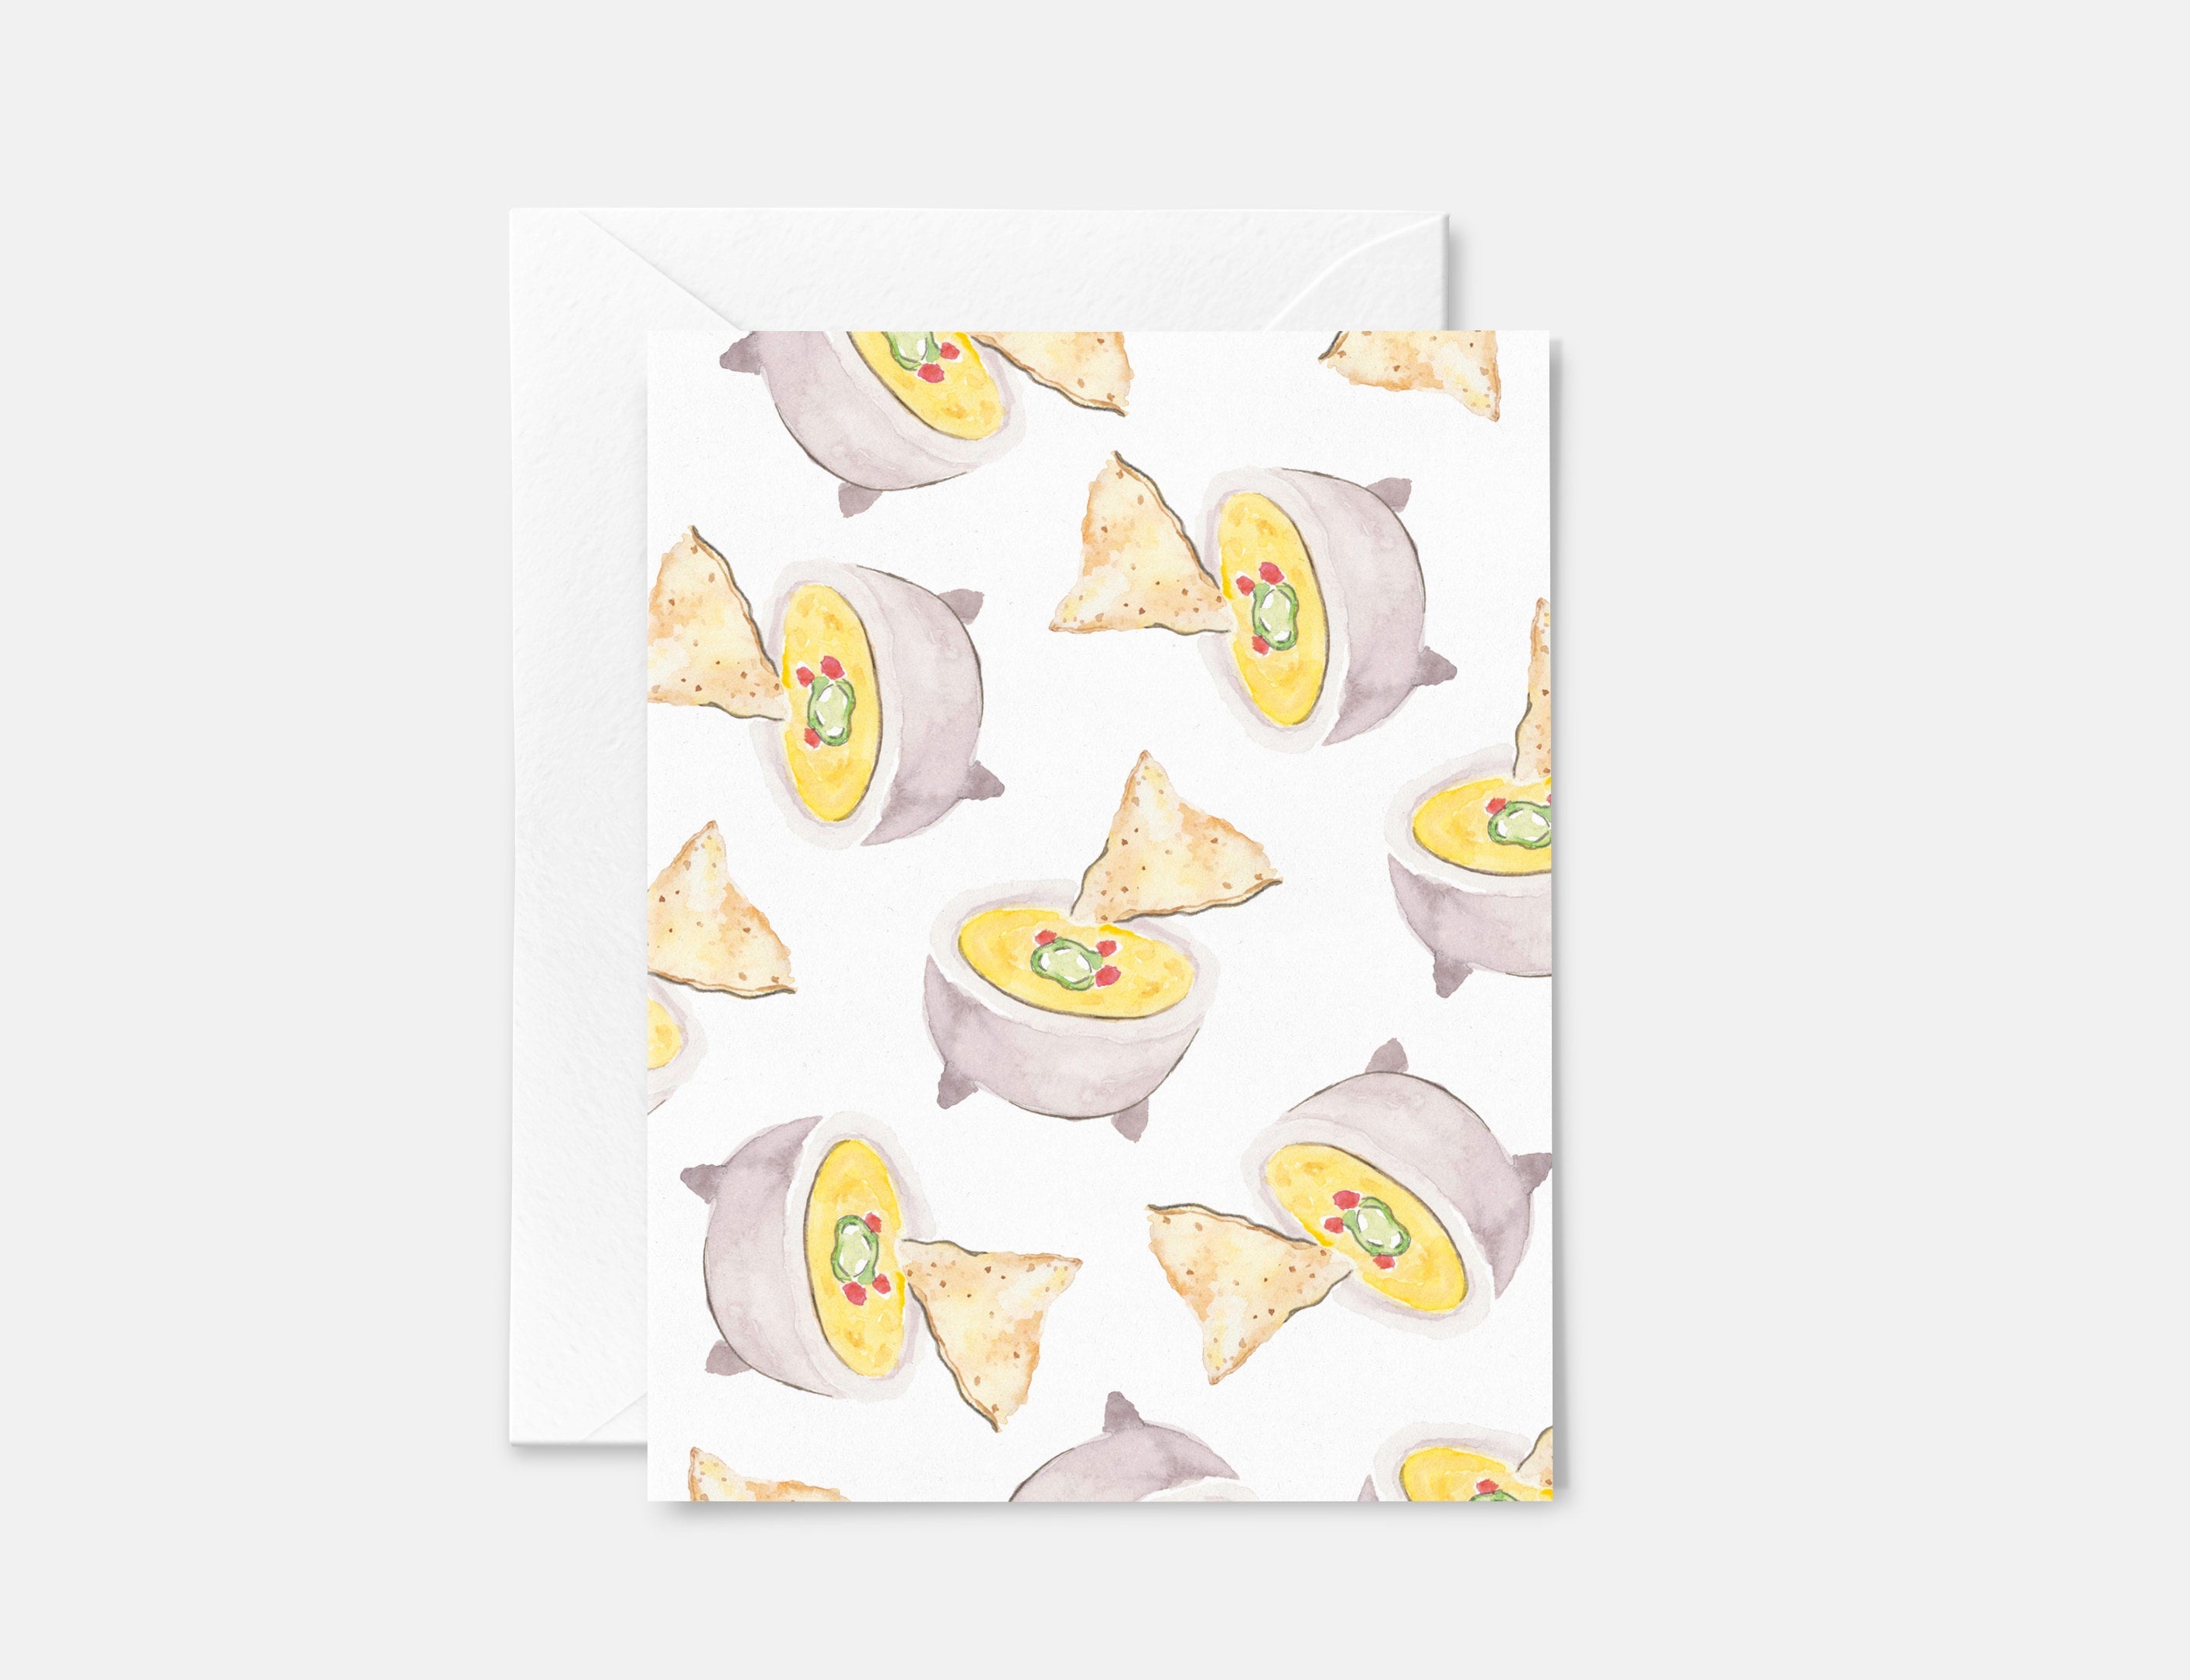 Queso Greeting Cards - Set of 6